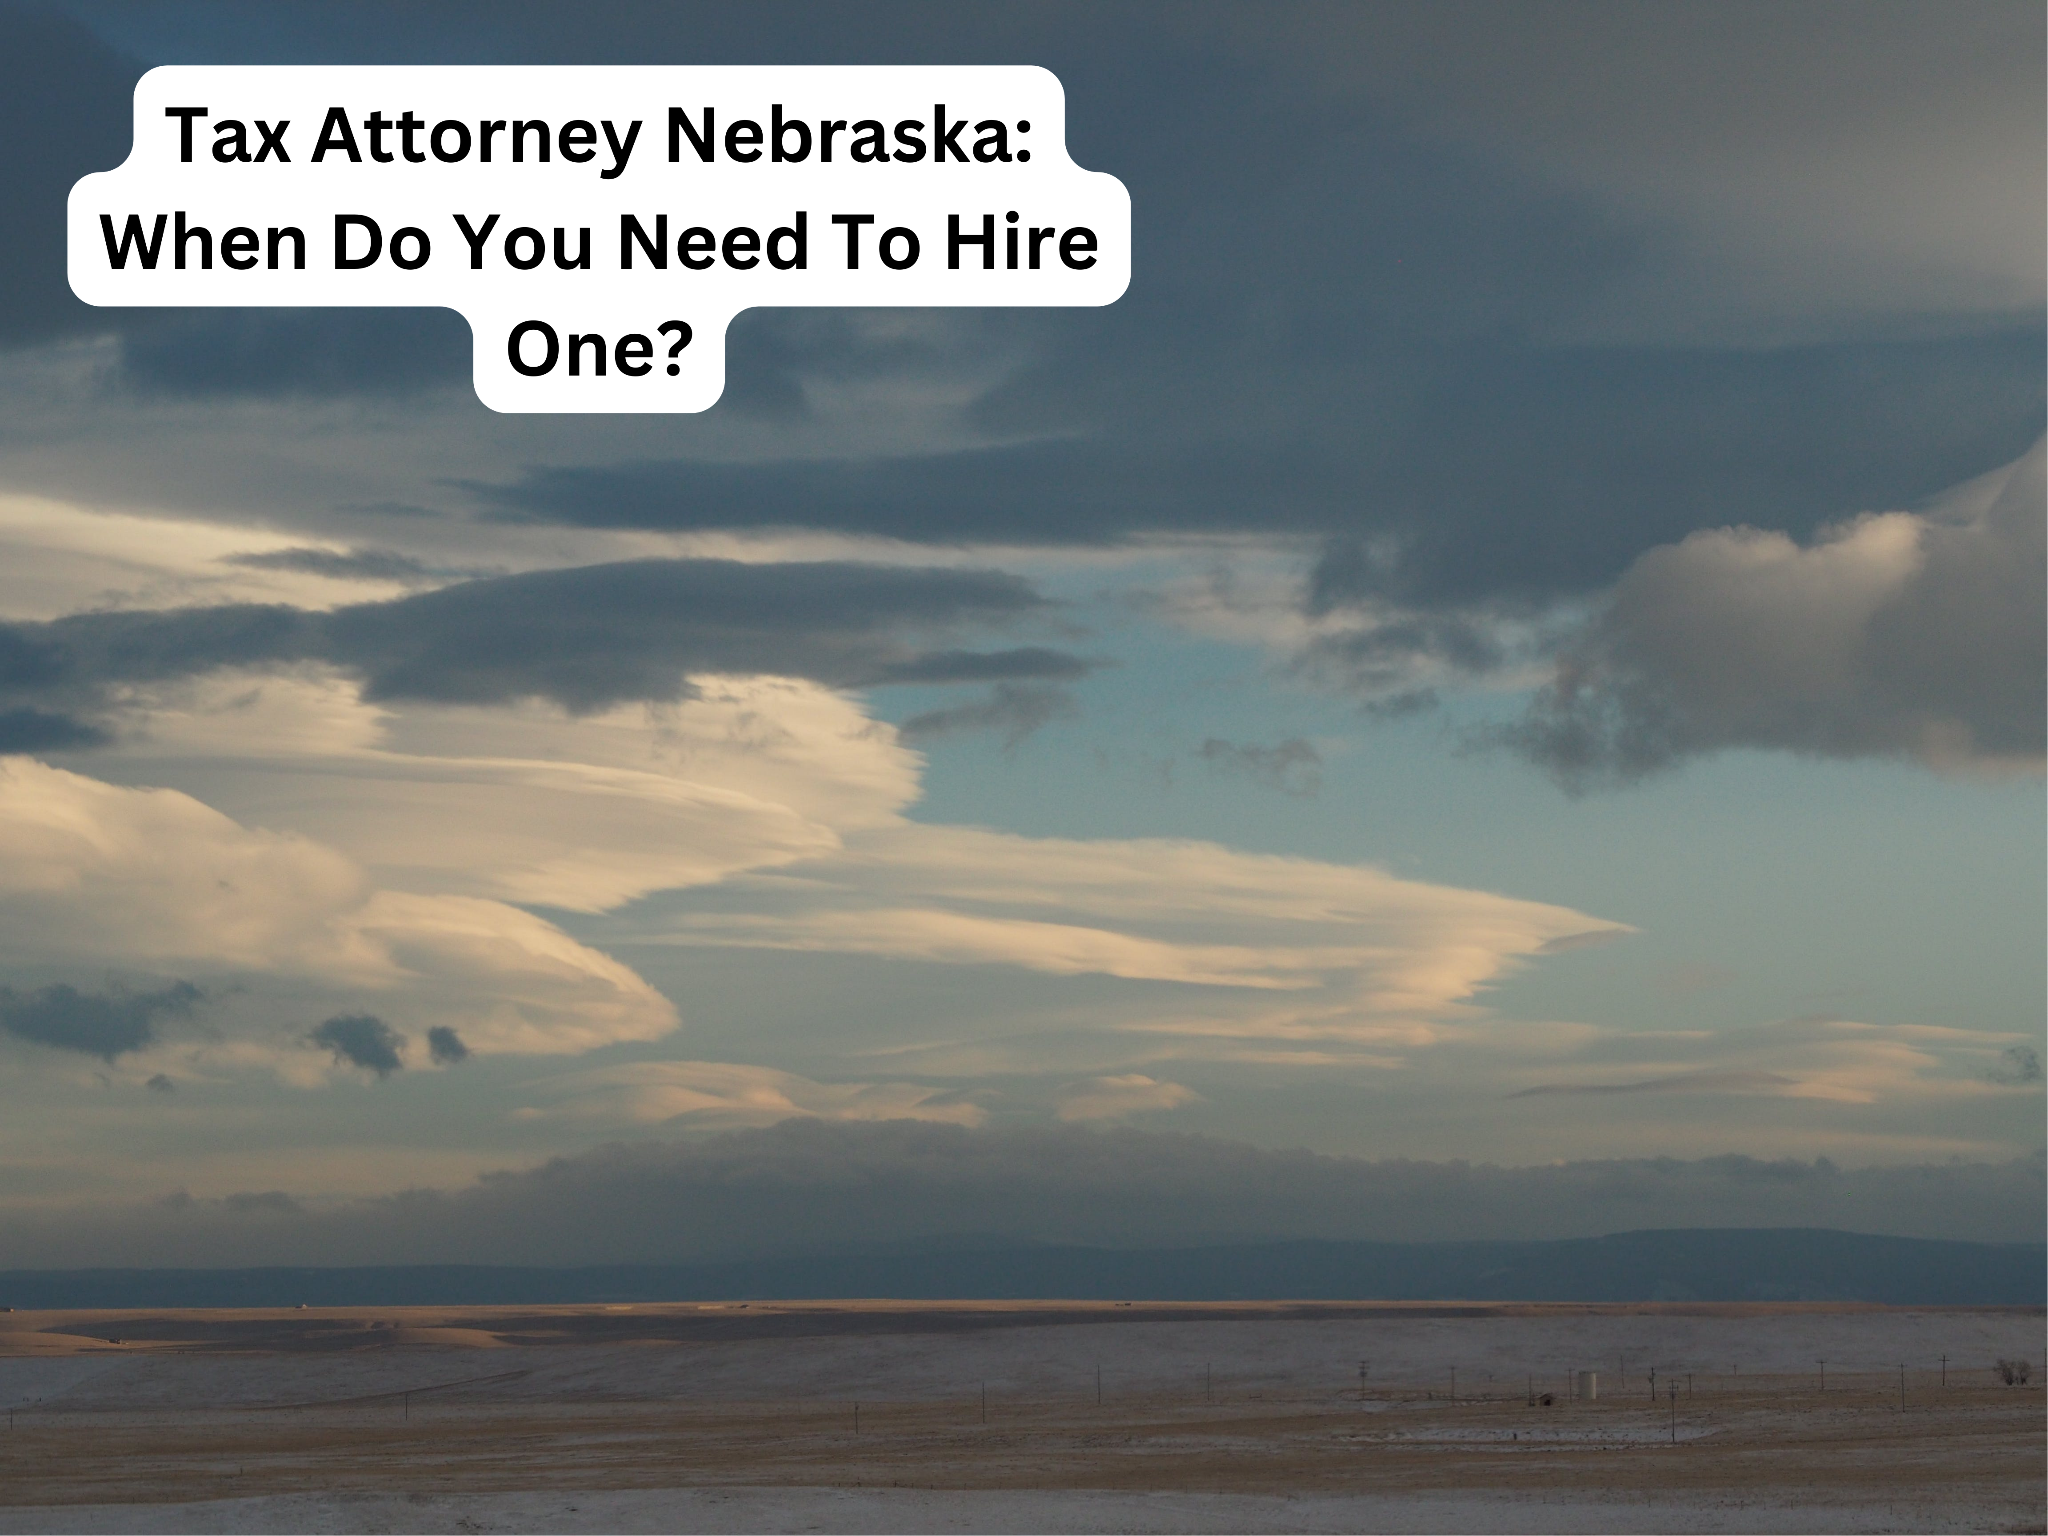 Tax Attorney Nebraska: When Do You Need To Hire One?